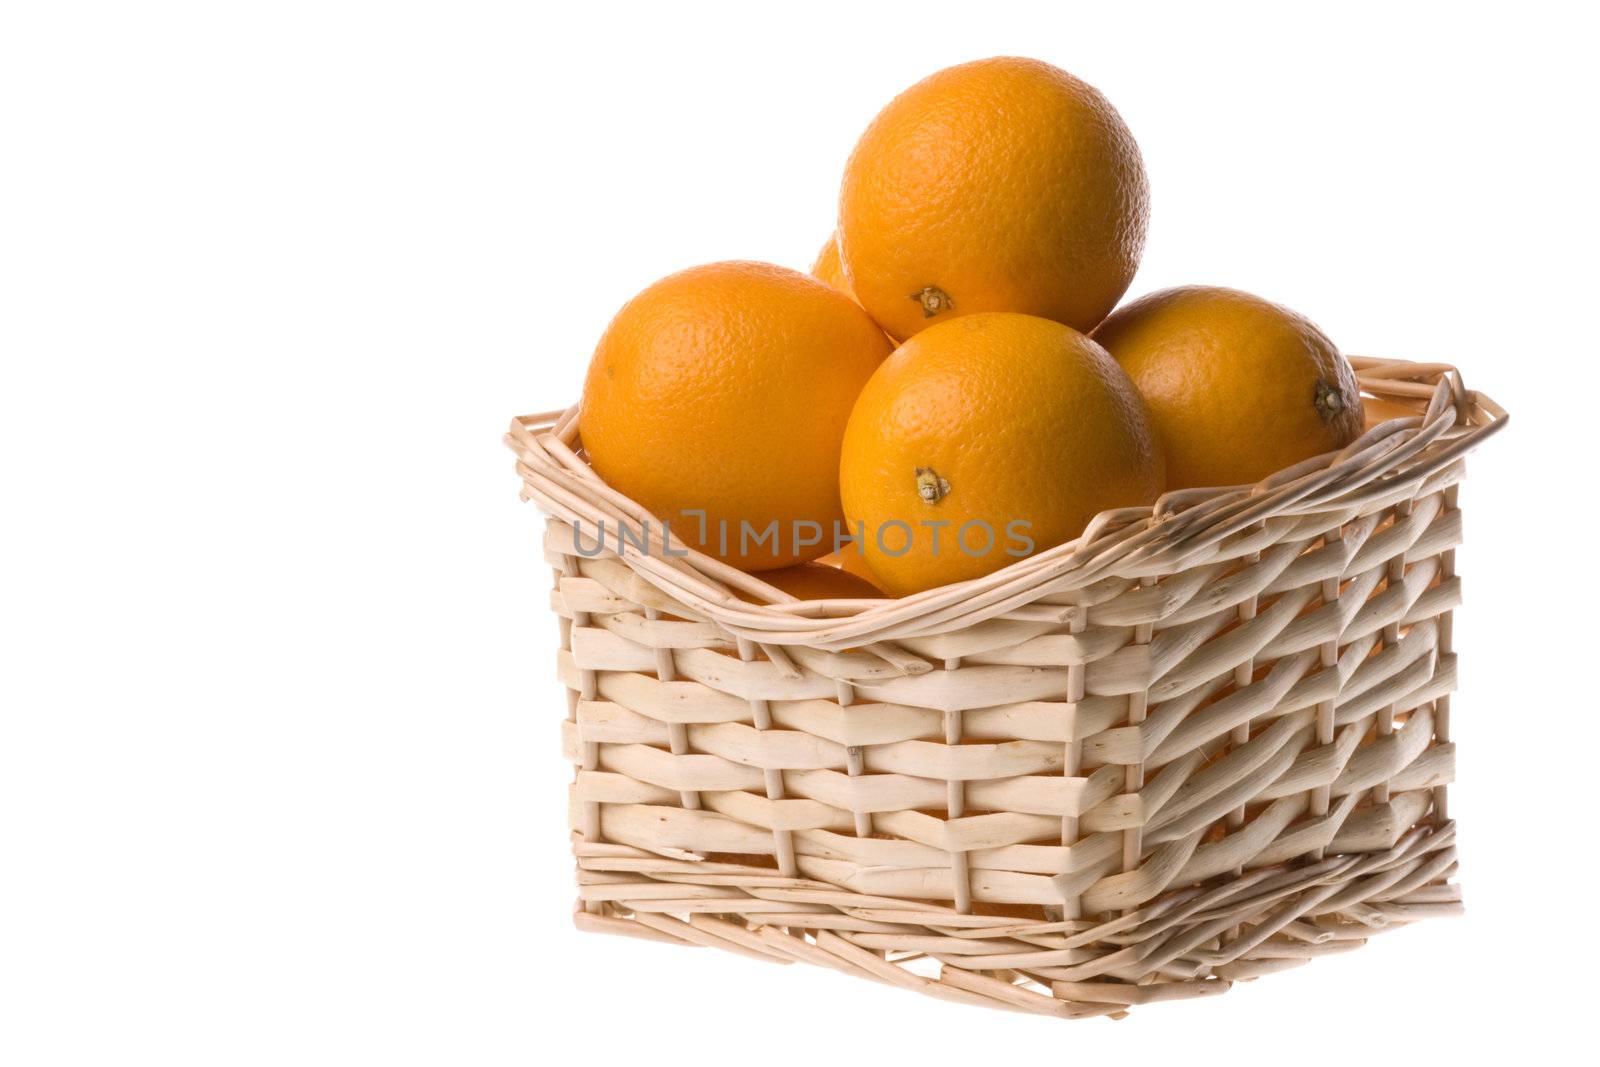 Oranges in a Basket by shariffc